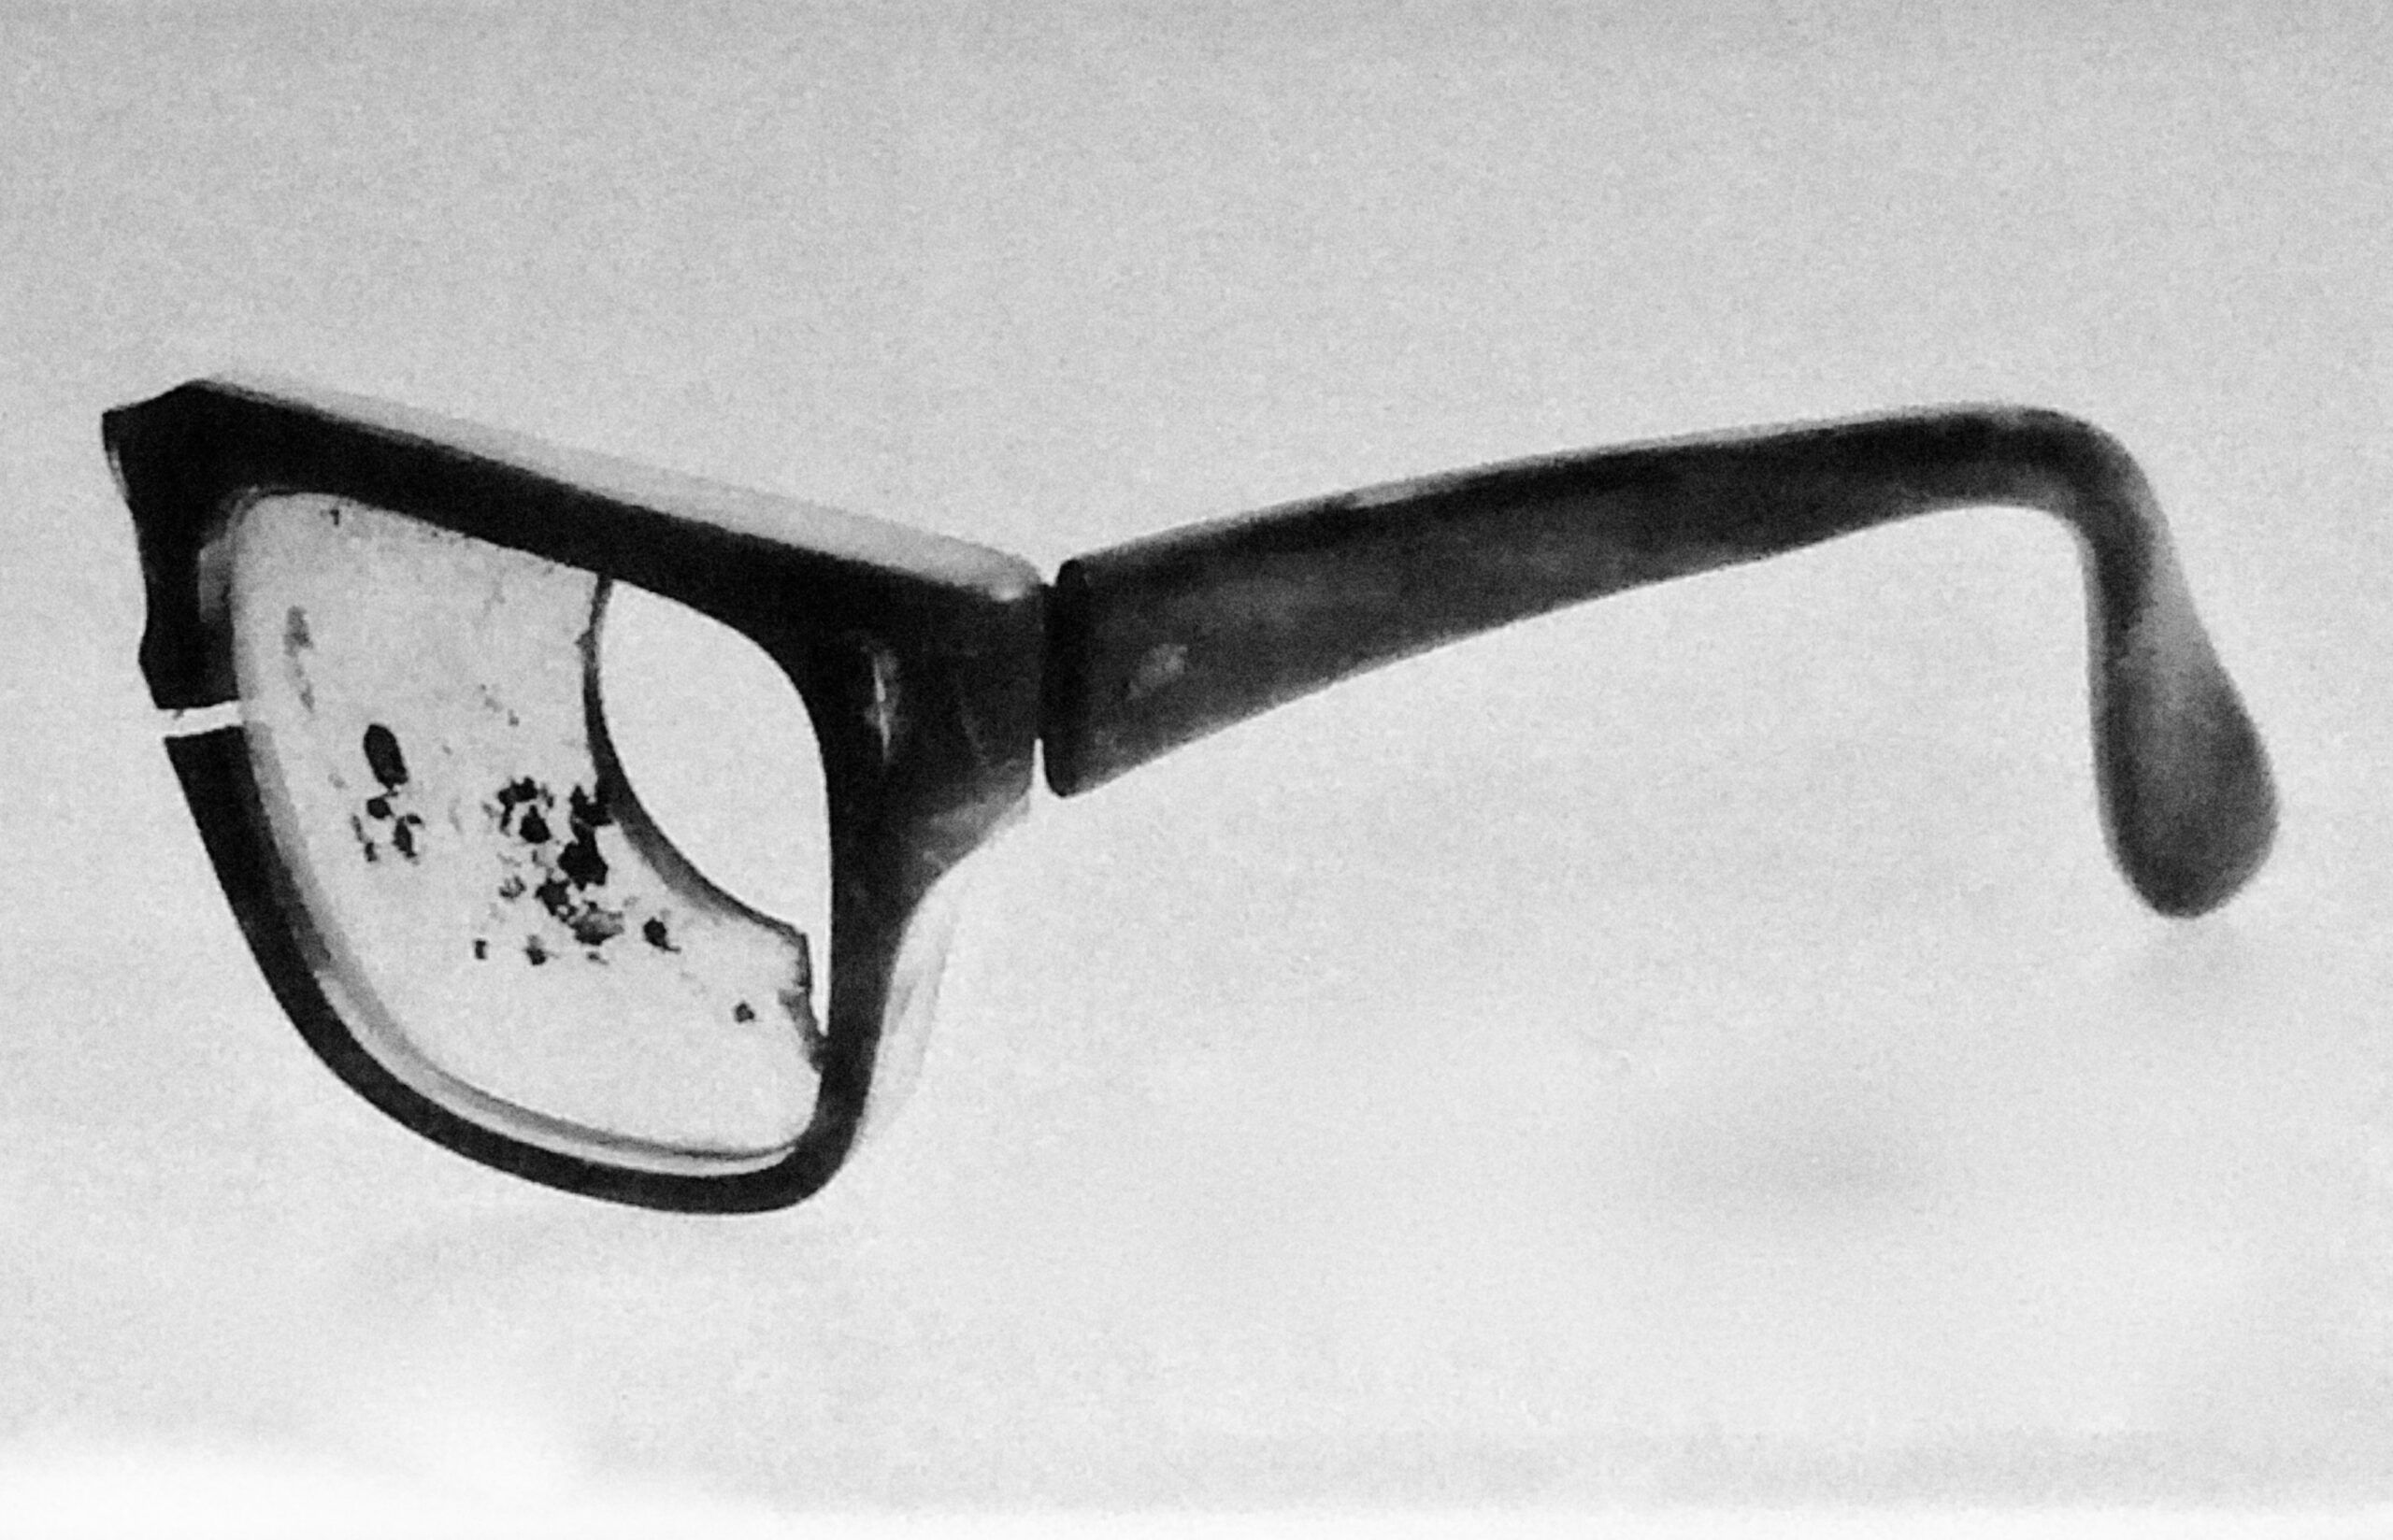 A black and white image of Chilean President Salvador Allende's glasses, damaged in the coup.